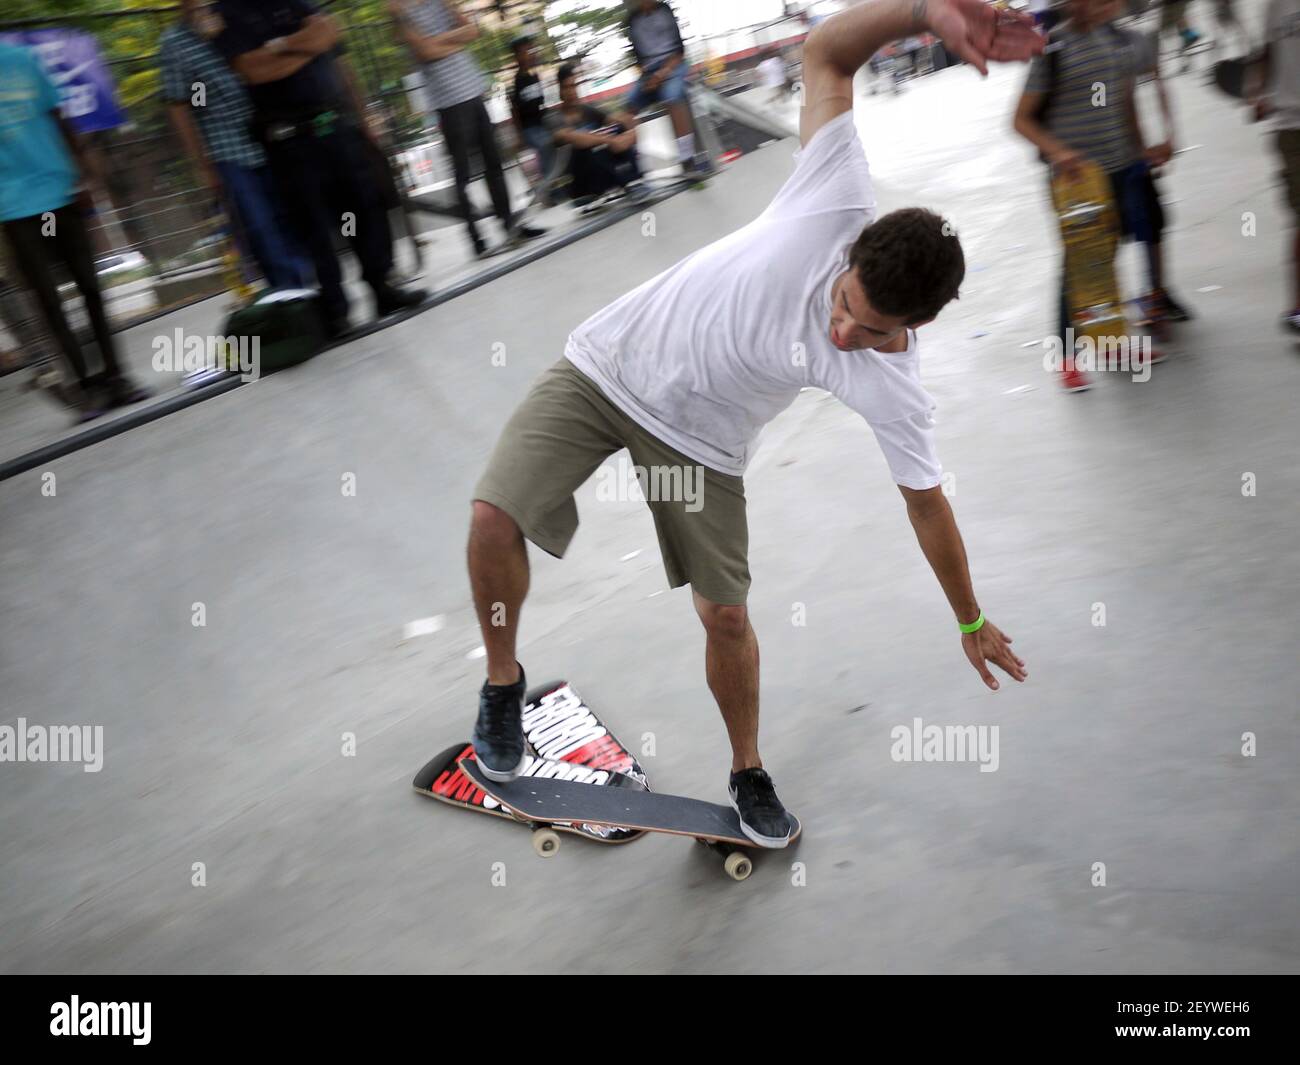 July 14, 2012, New York, NY - The 5 Boro long ollie contest at LES  skatepark under the Manhattan Bridge on Cherry Street. Skateboarders try to  jump over as many as 24